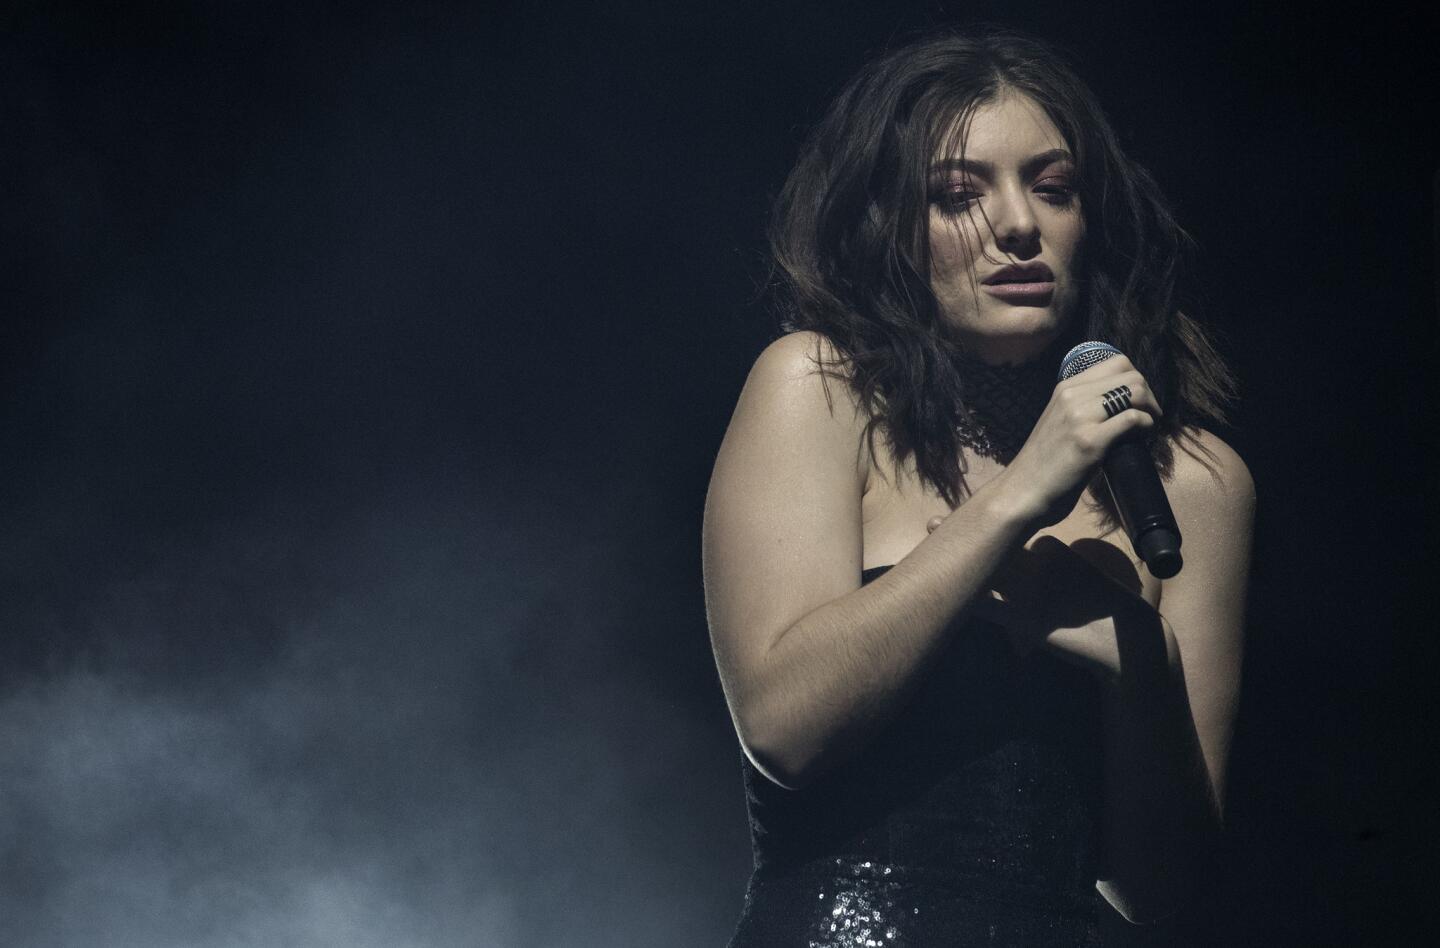 Lorde performs at Coachella during the second weekend.